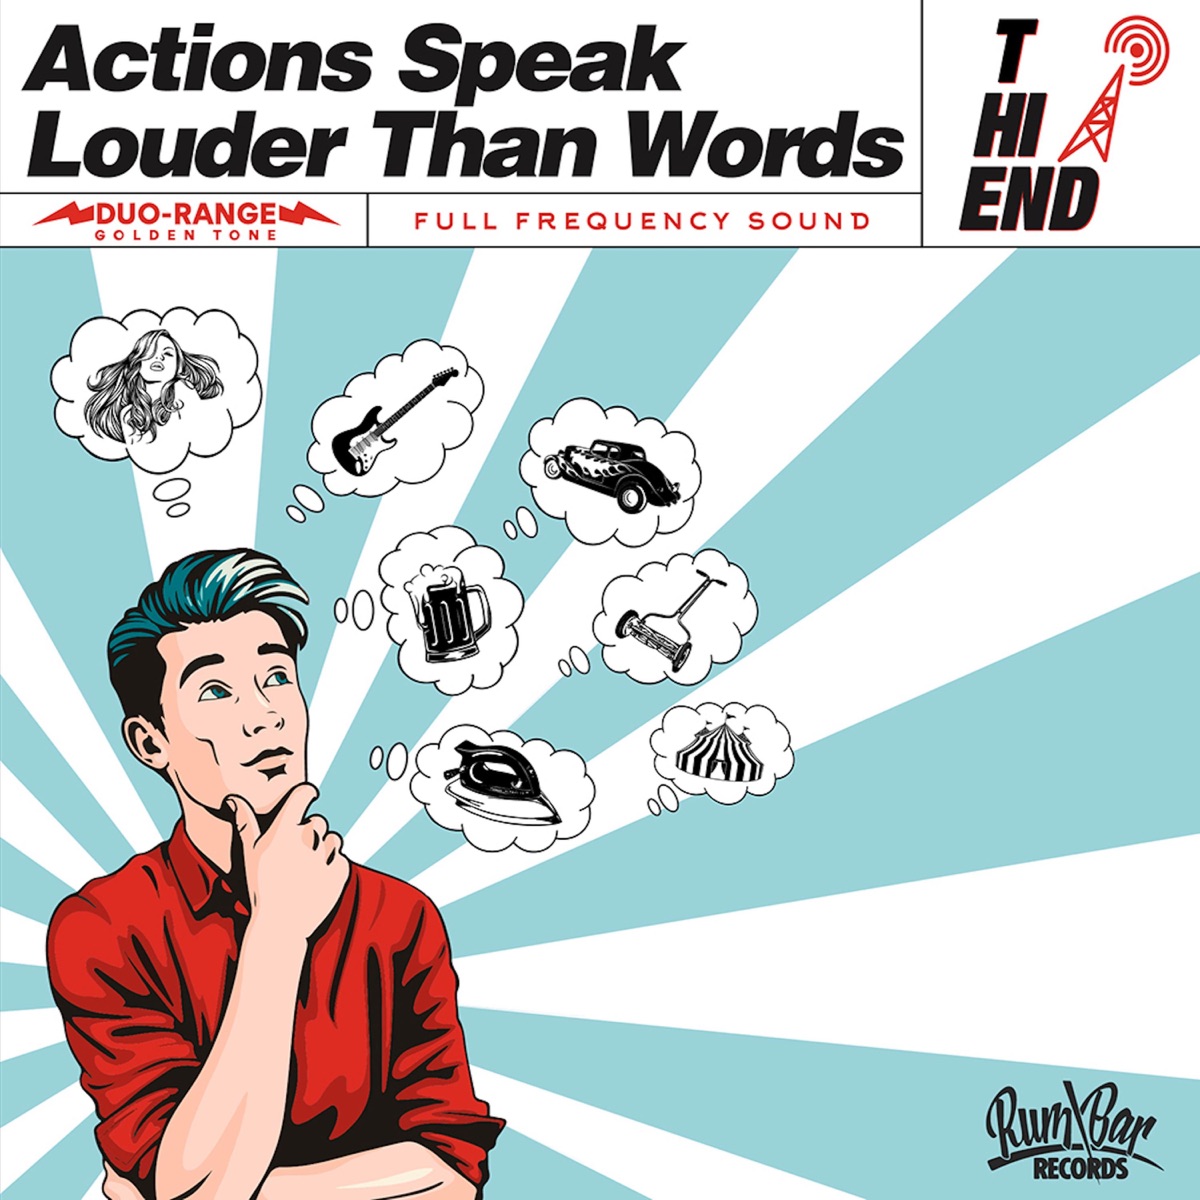 Actions Speak Louder Than Words - Single - Album by The Hi-End - Apple Music